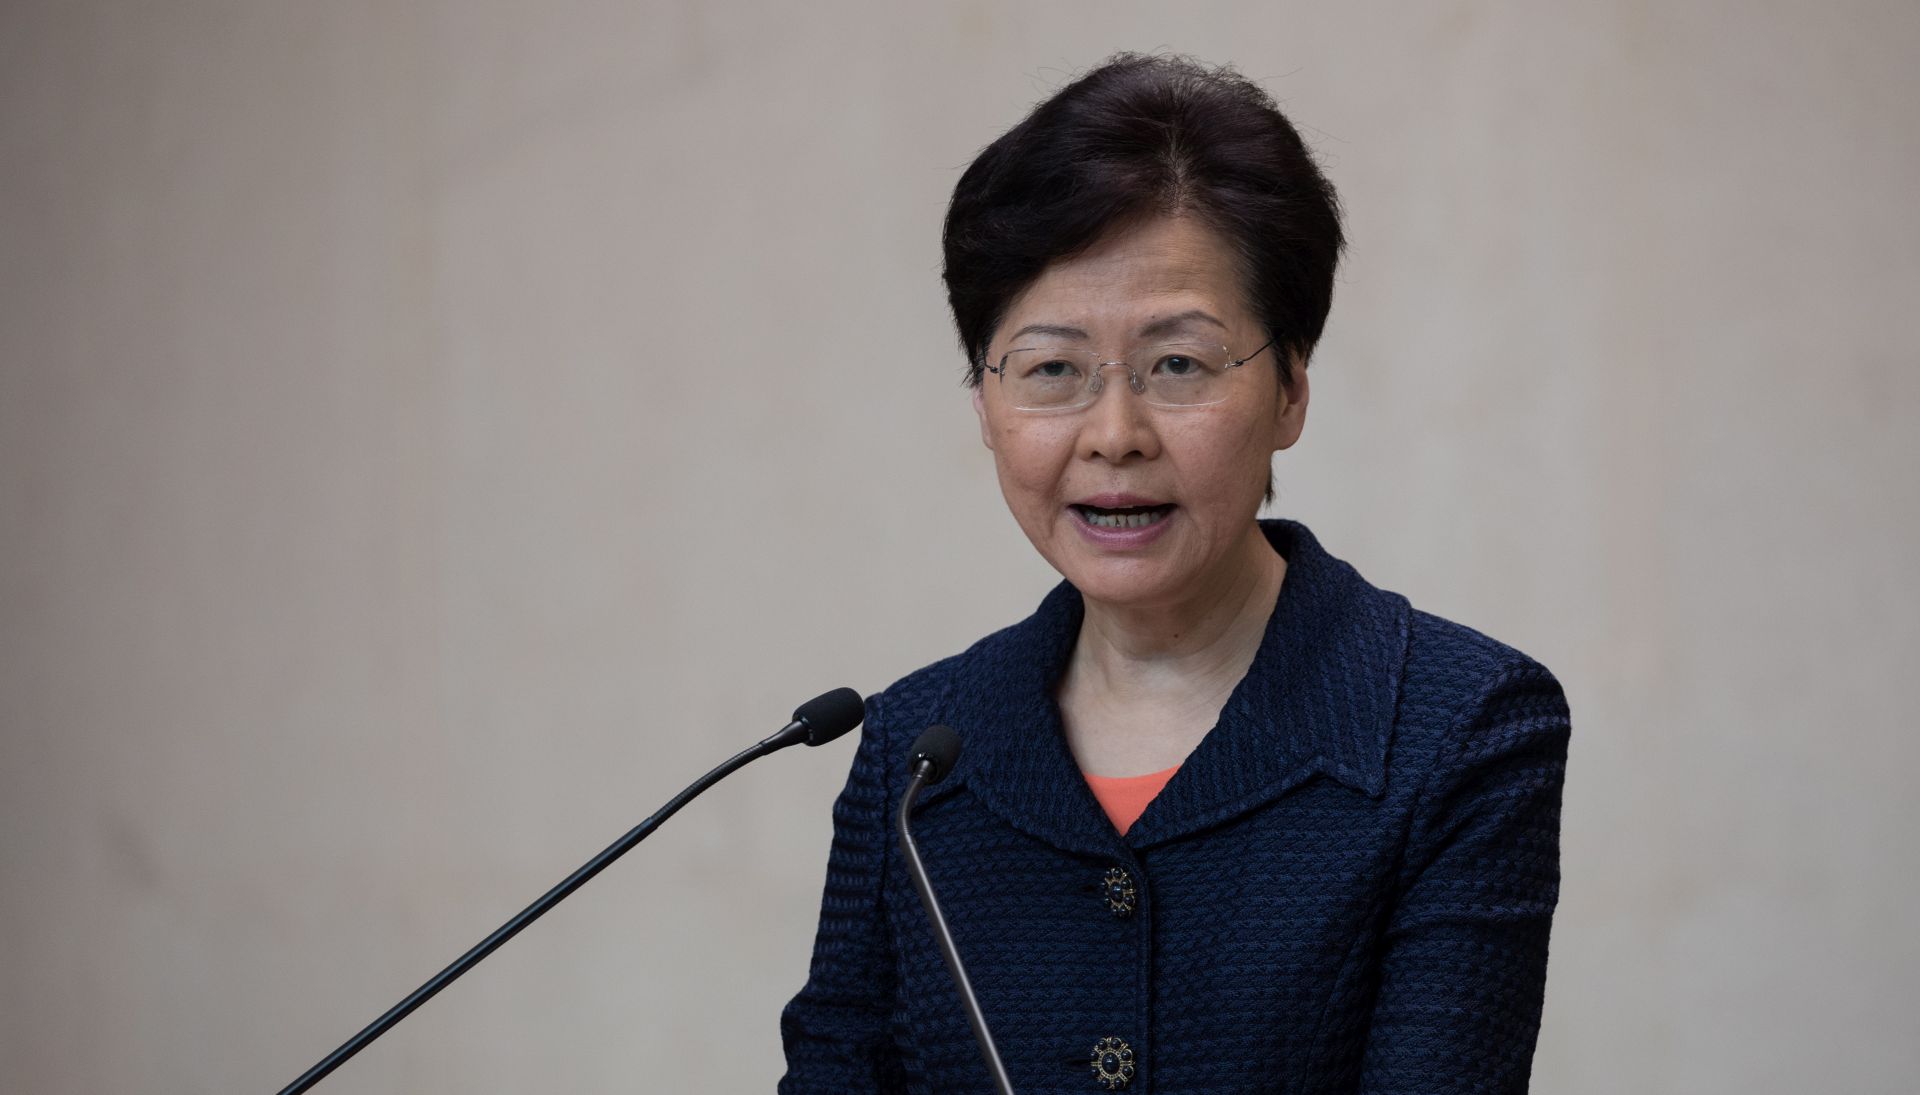 epa07781589 Hong Kong Chief Executive Carrie Lam Cheng Yuet-ngor speaks during a media briefing before the weekly executive council meeting in Hong Kong, China, 20 August 2019. Lam said her administration would immediately work on setting up a means of finding a solution to the civil unrest triggered by her massively unpopular extradition bill.  EPA/JEROME FAVRE